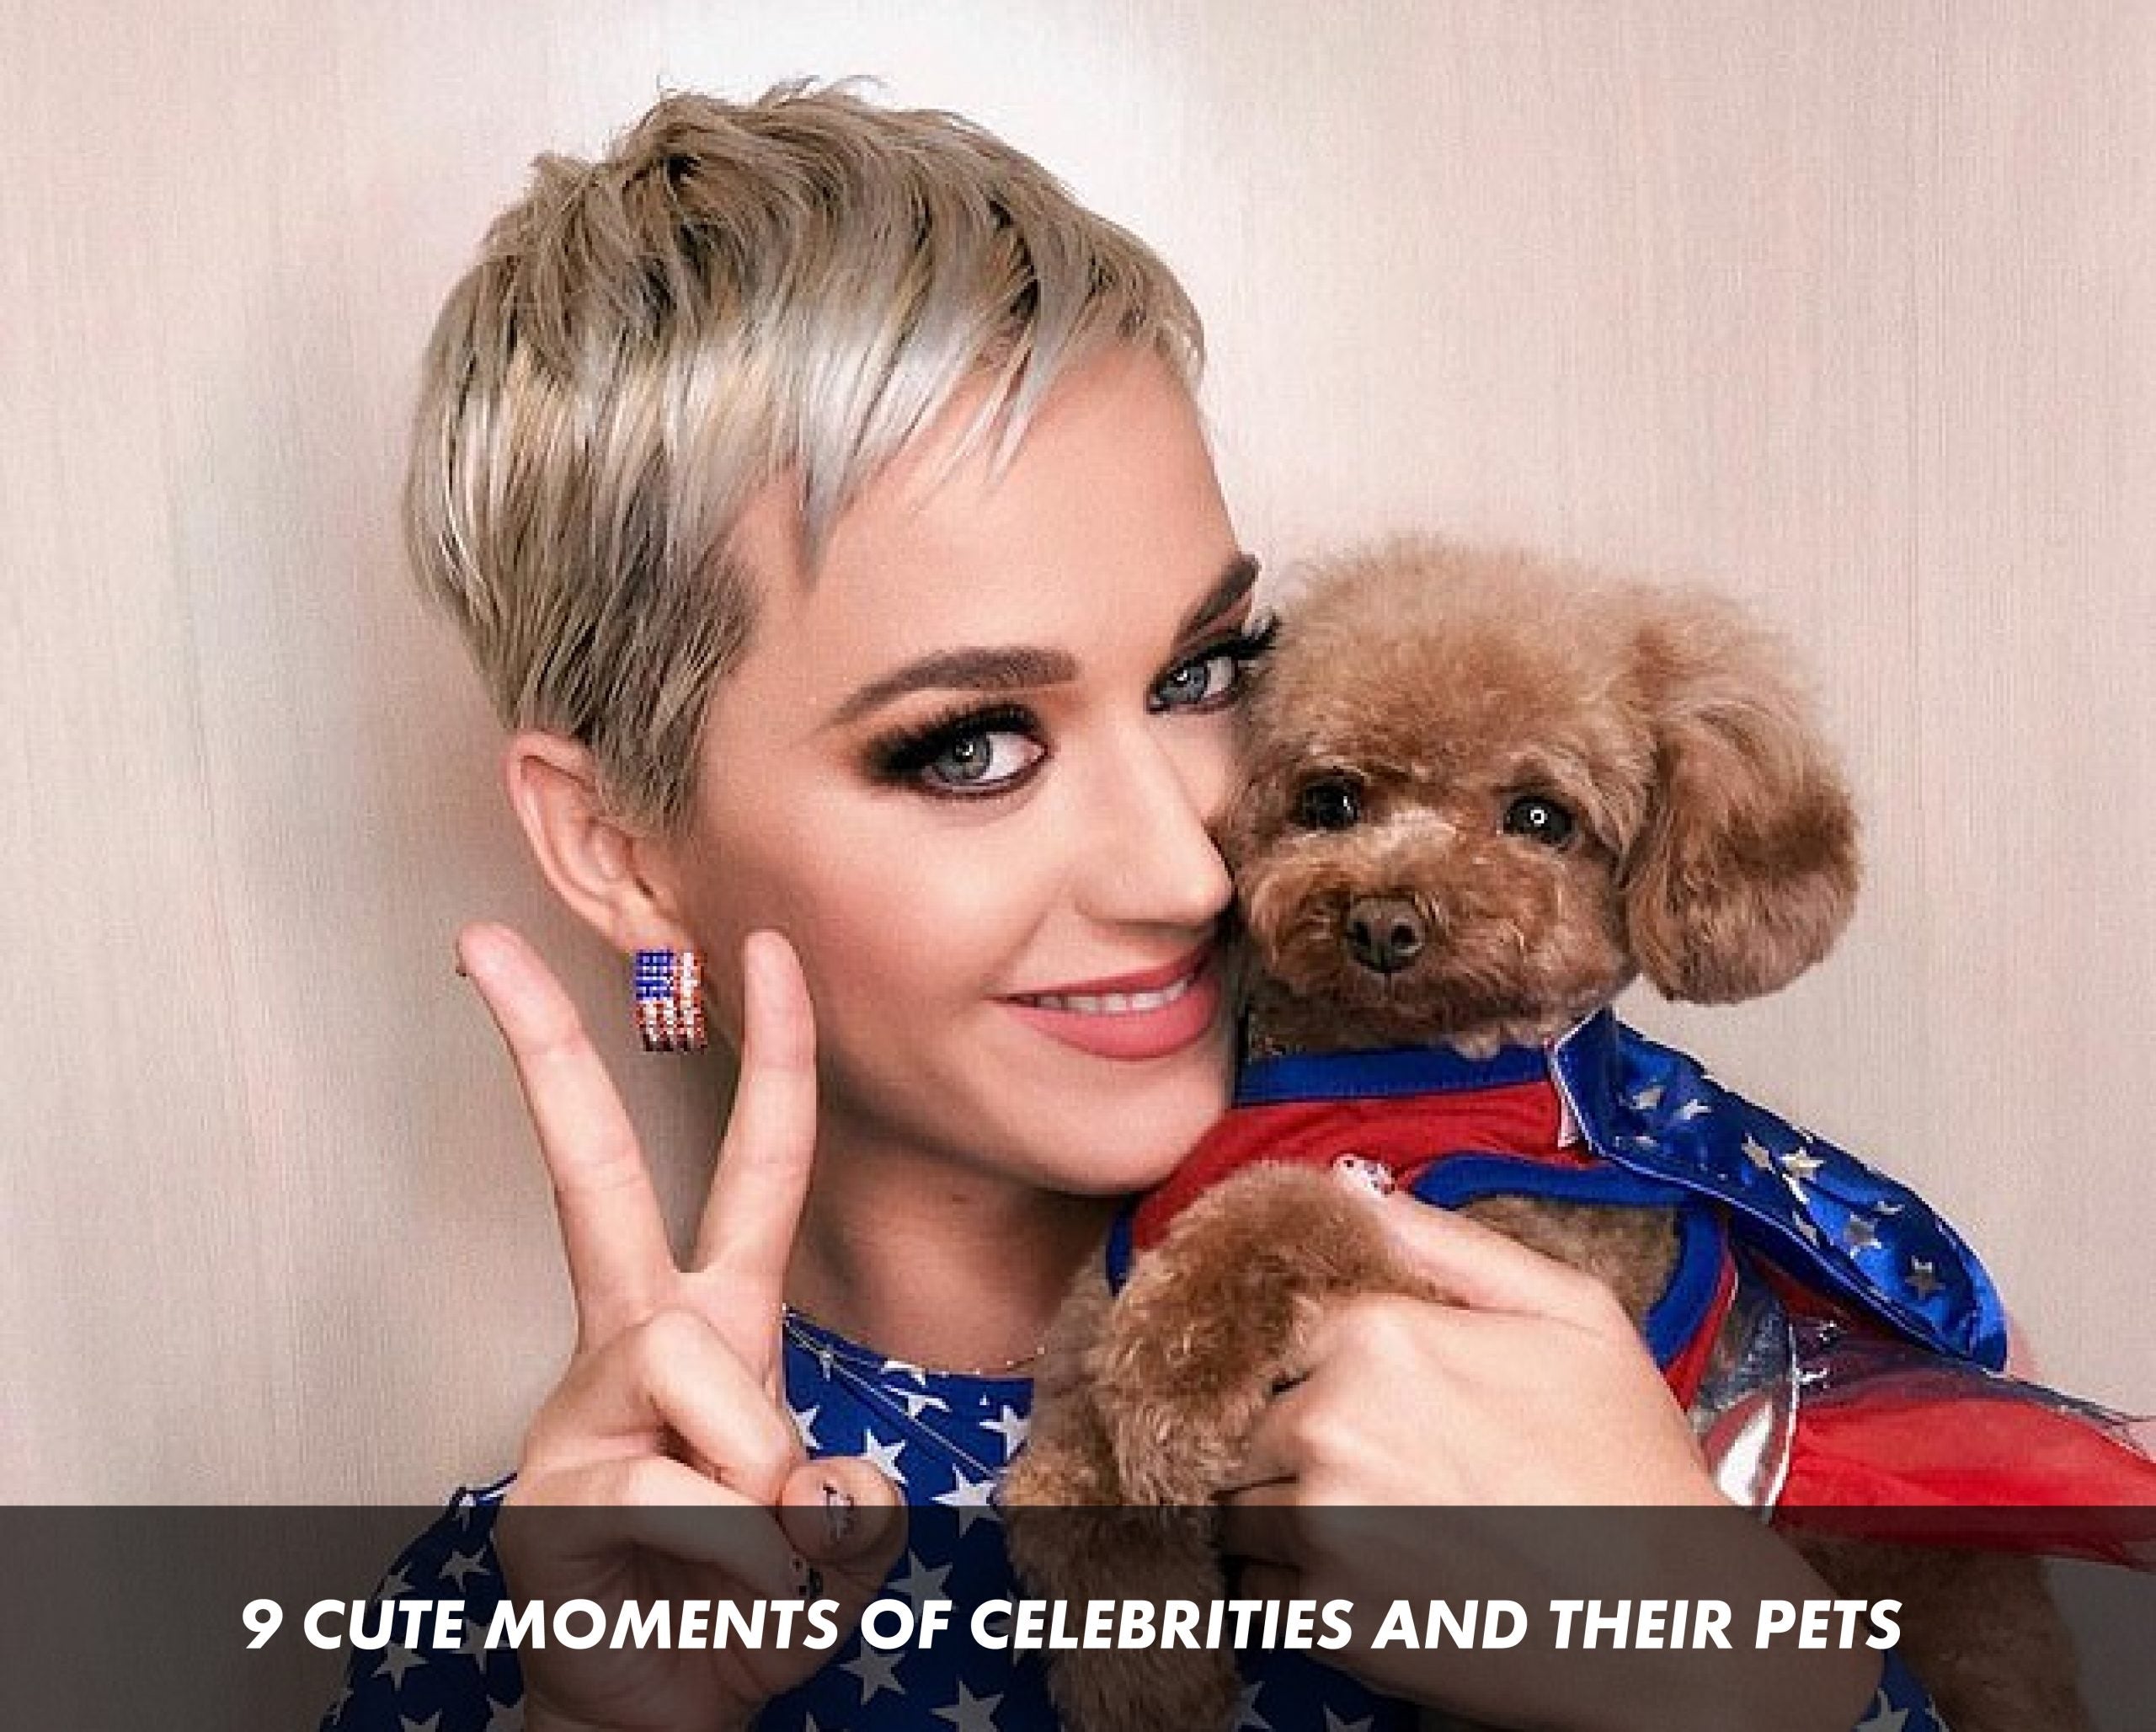 9 Cute Moments of Celebrities and their Pets